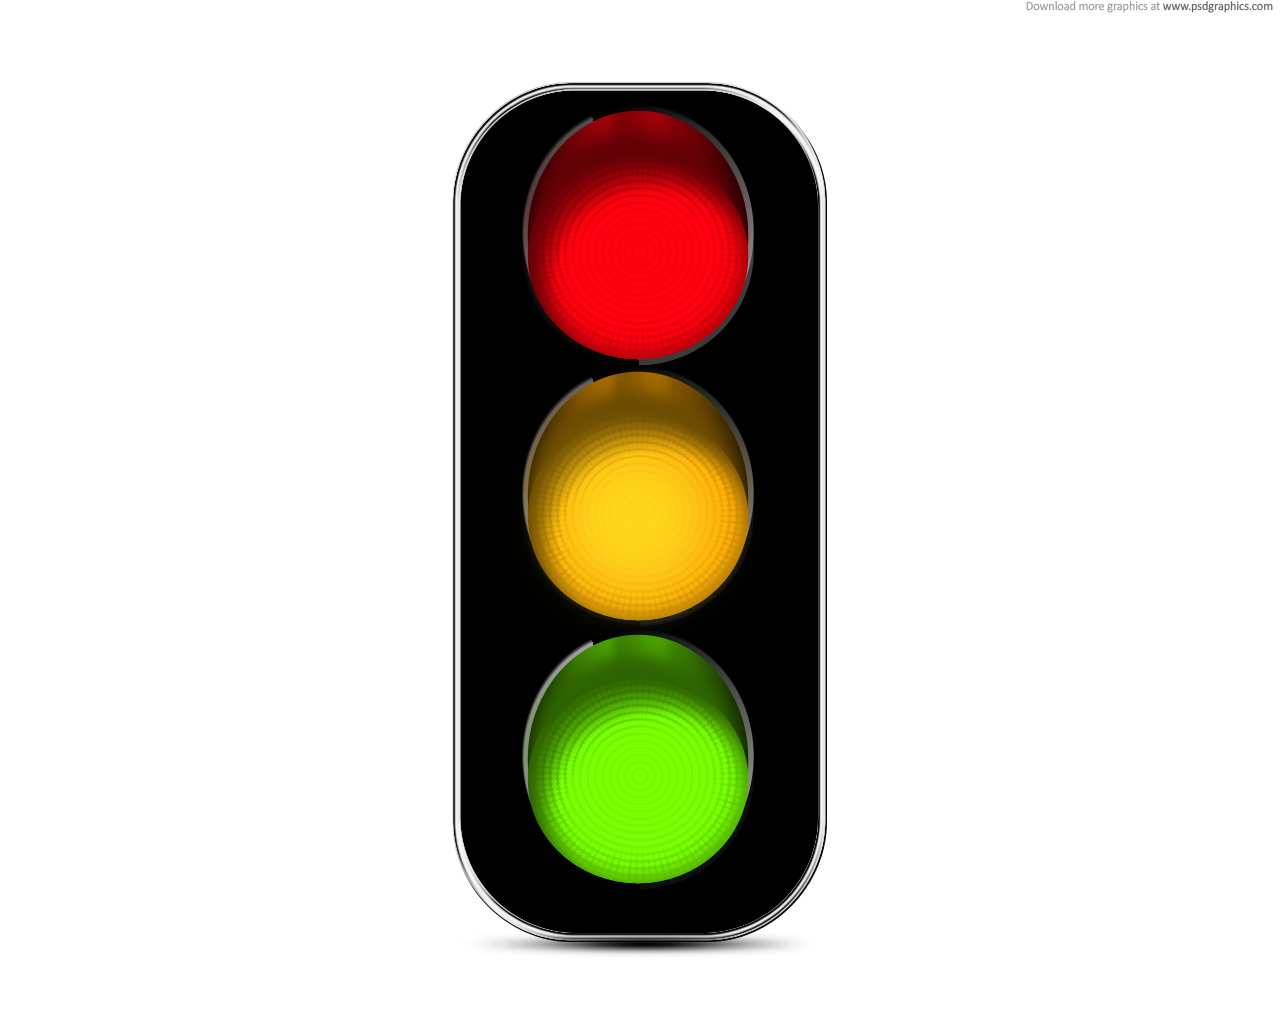 Traffic Signal Images - Clipart library